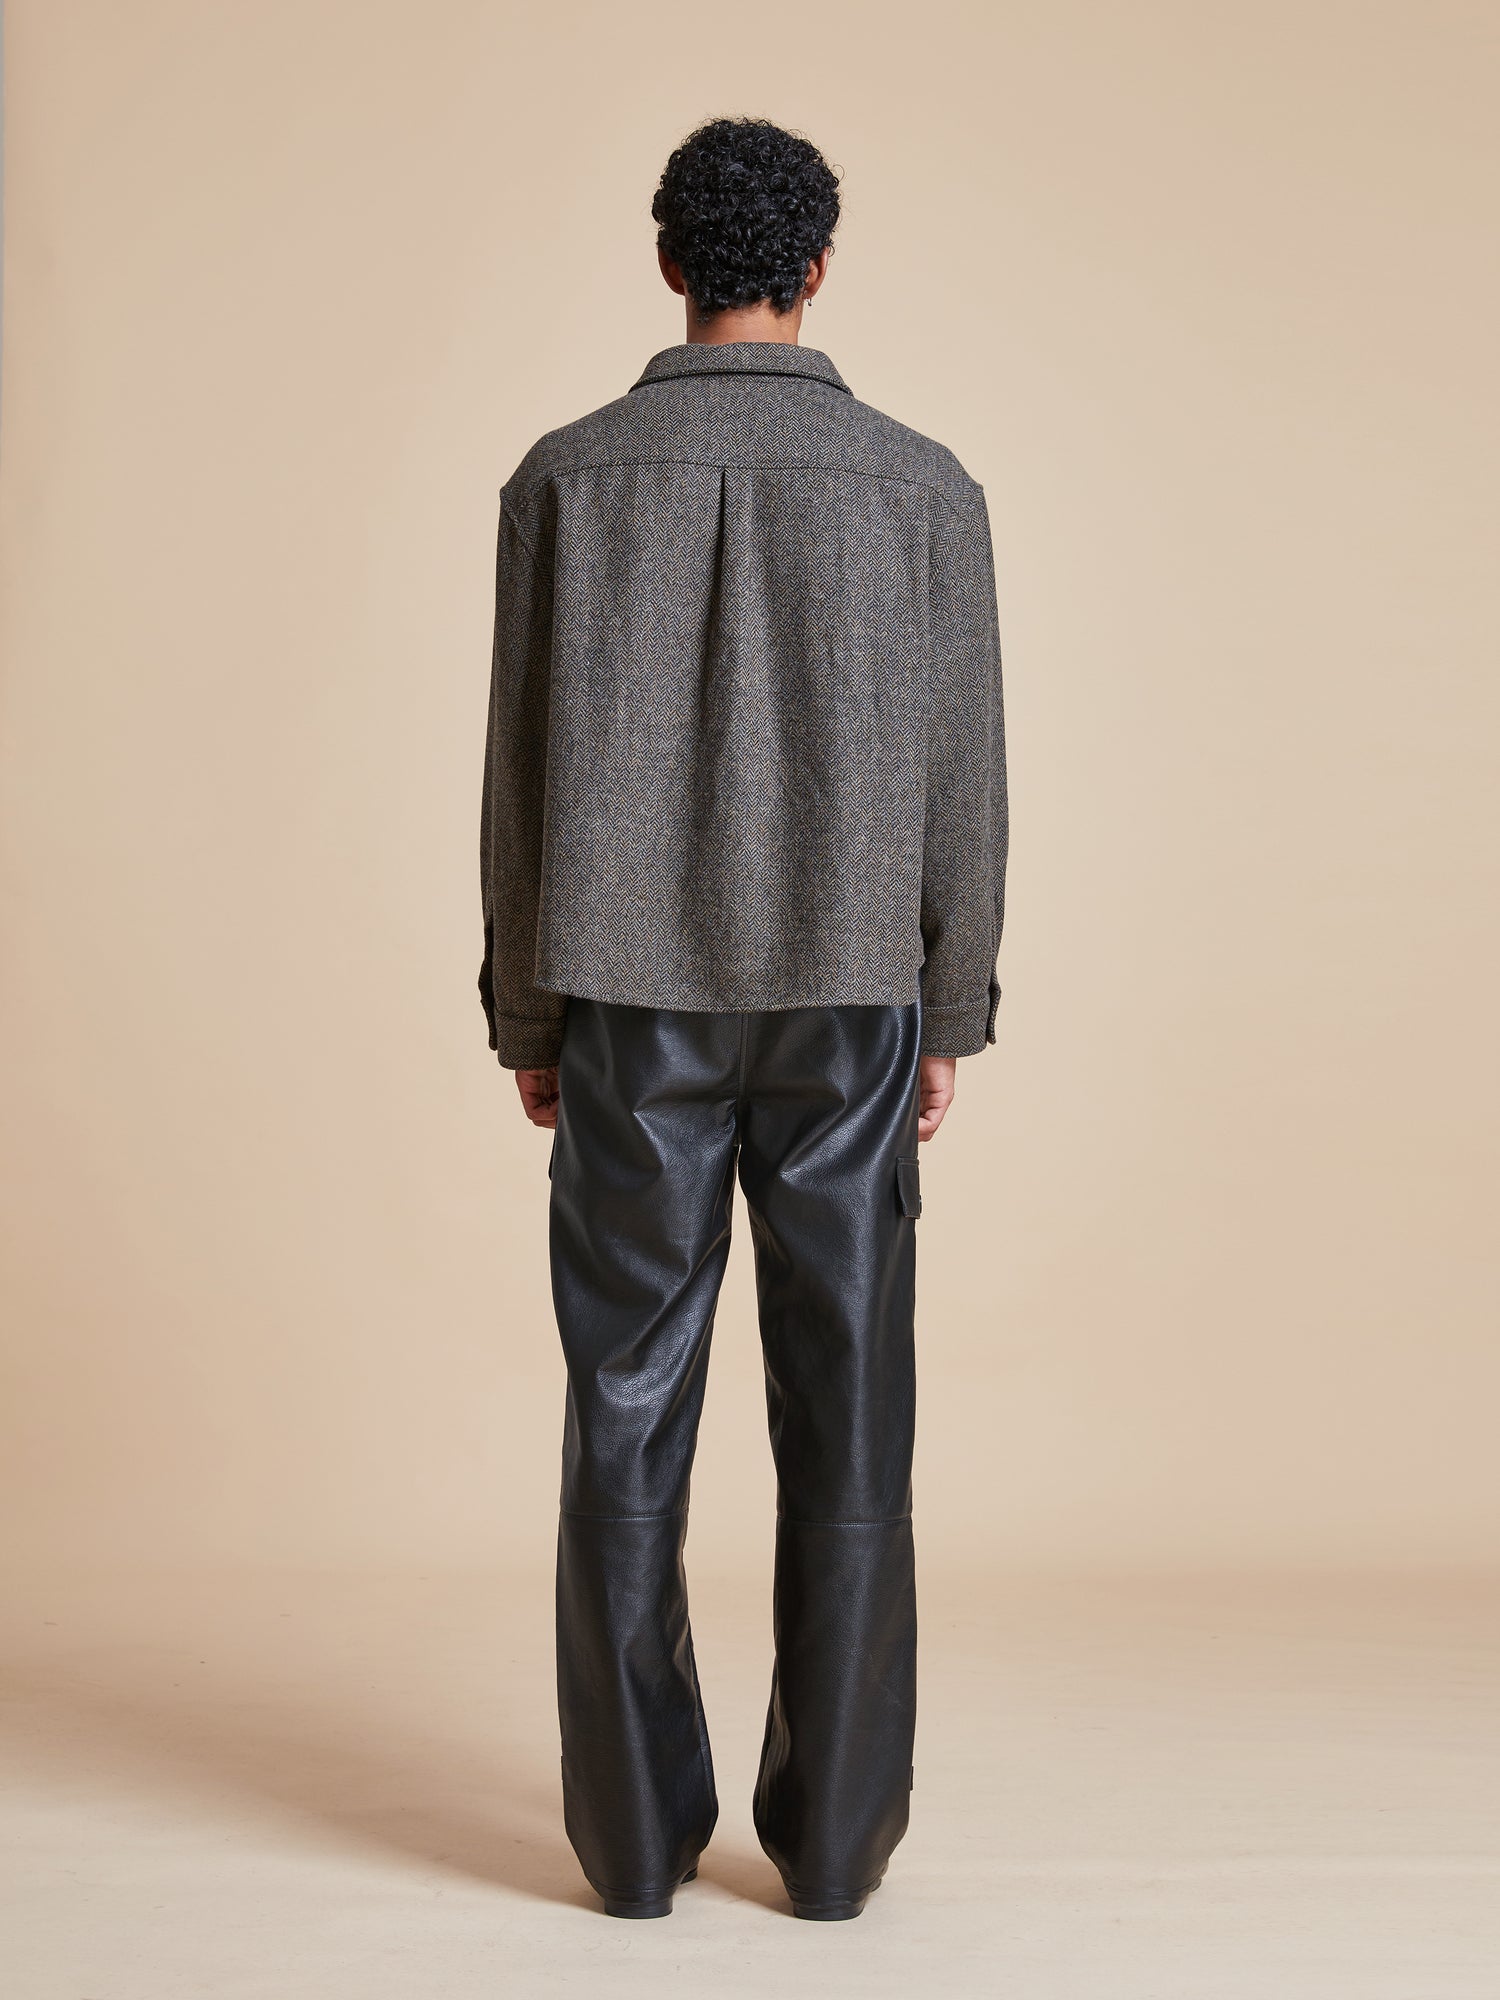 The back view of a man wearing a Found Raven Herringbone Overshirt and leather pants.